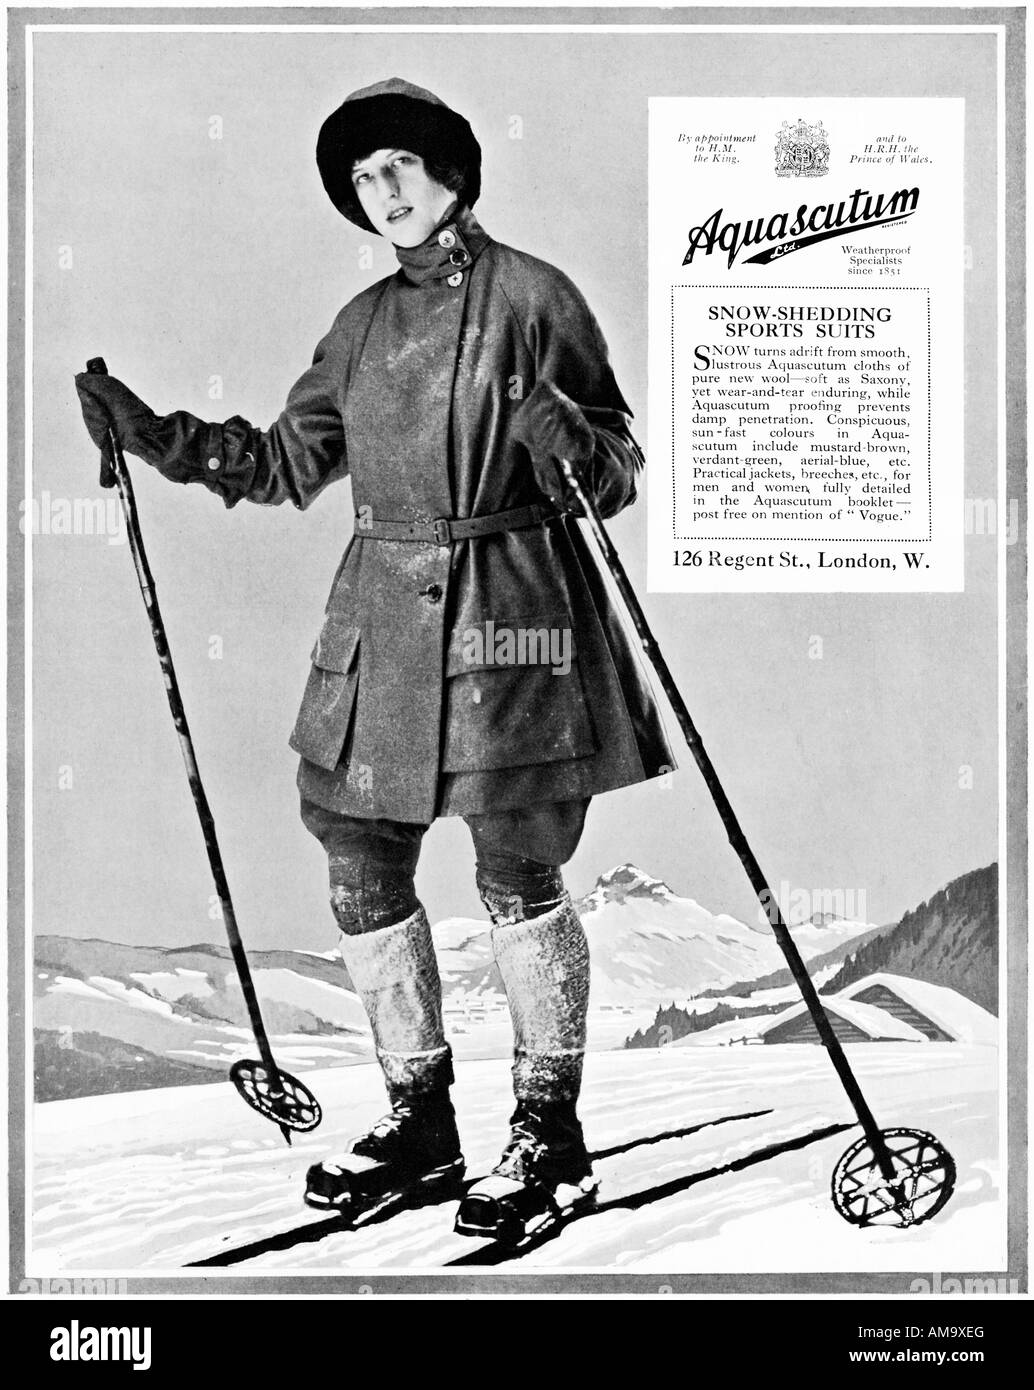 Aquascutum Snow Shedding Sports Suits 1923 advert for the fashionable London clothes for winter sports Stock Photo